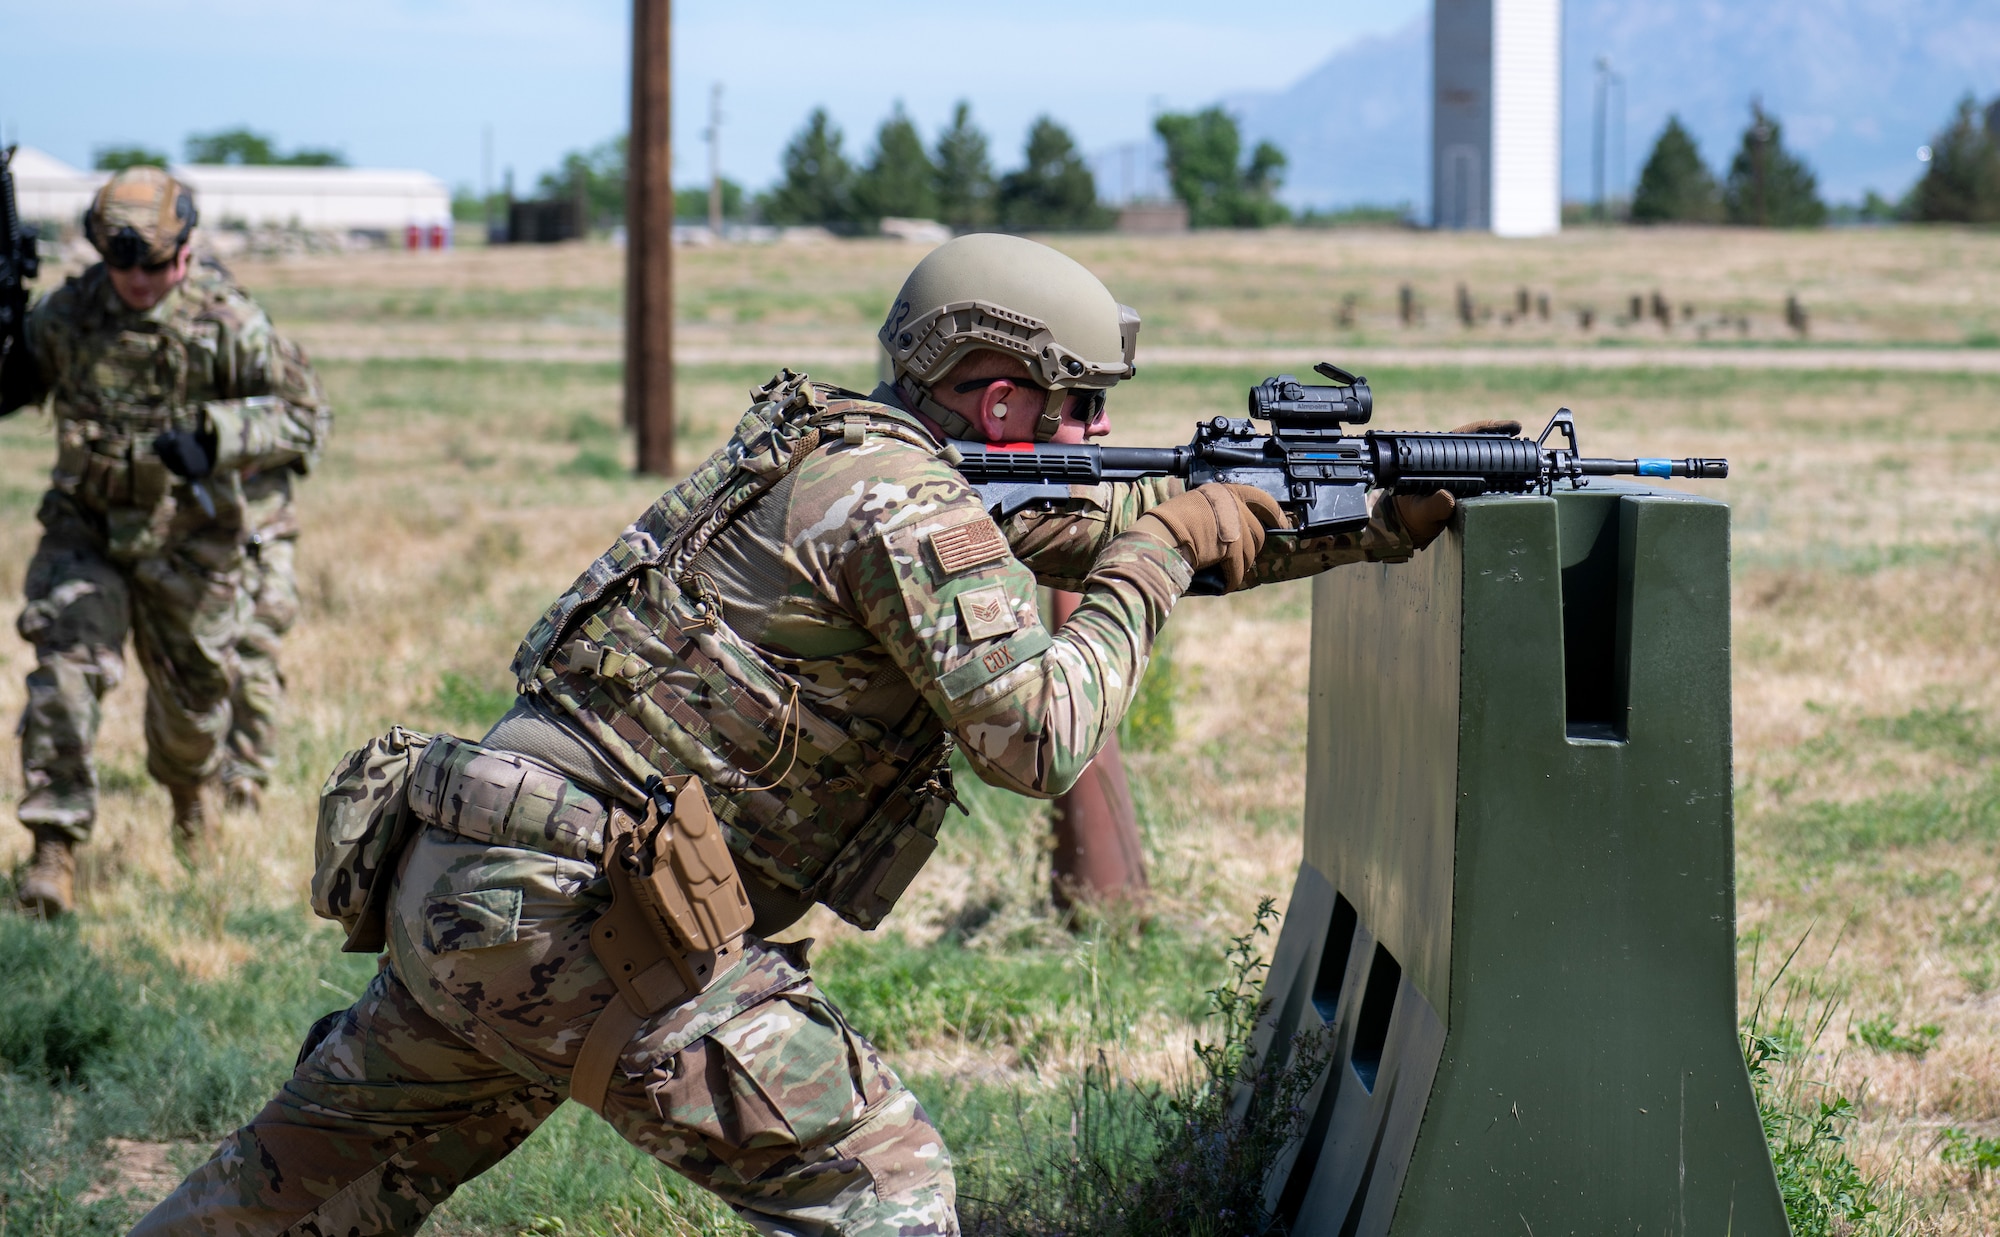 Staff Sgt. Kallen Cox, 419th Security Forces combat arms instructor, takes aim at a target while providing cover for his partner during a “Shoot, Move, Communicate” exercise at Hill Air Force Base, Utah on June 11, 2022. The exercise is part of their annual weapons training plan, ensuring Airmen remain proficient in not only marksmanship, but how to move and communicate effectively when engaged with a target. (U.S. Air Force photo by Senior Airman Erica Webster)